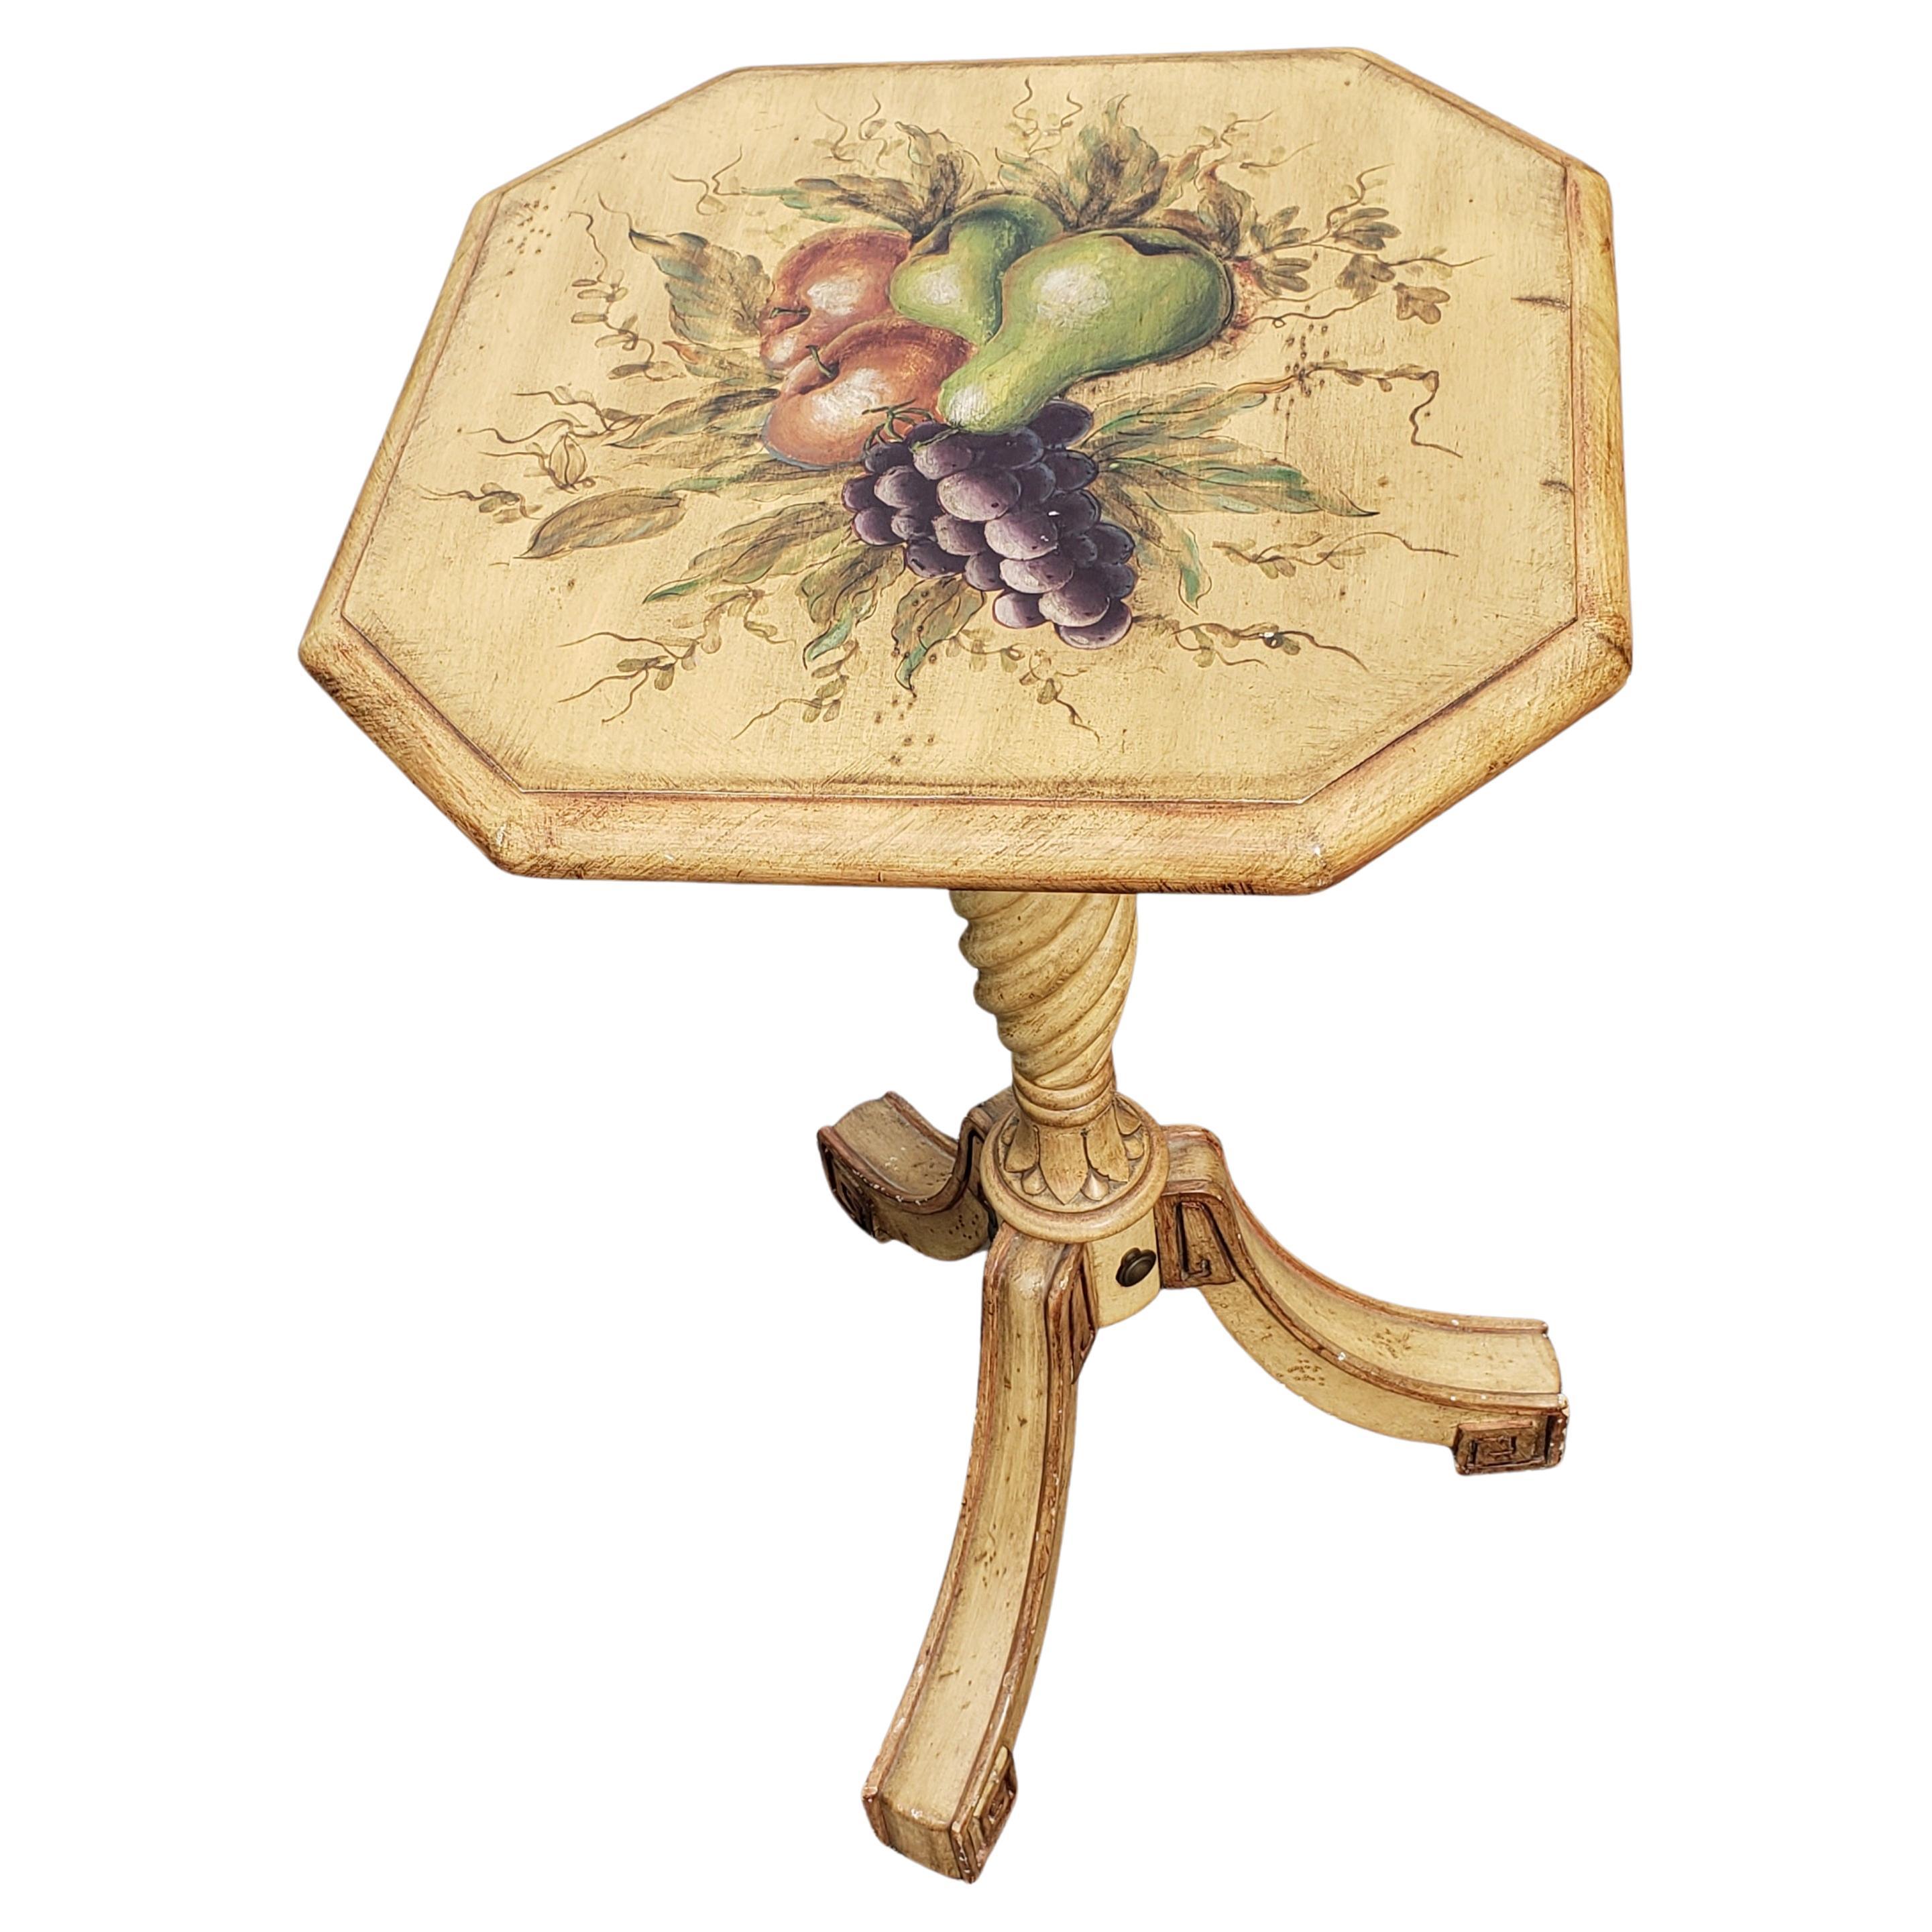 A modern decorated painted tripod pedestal tilt-top side table, painted in antique white/ cream background color with fruits painting on top.

Measures 15.25